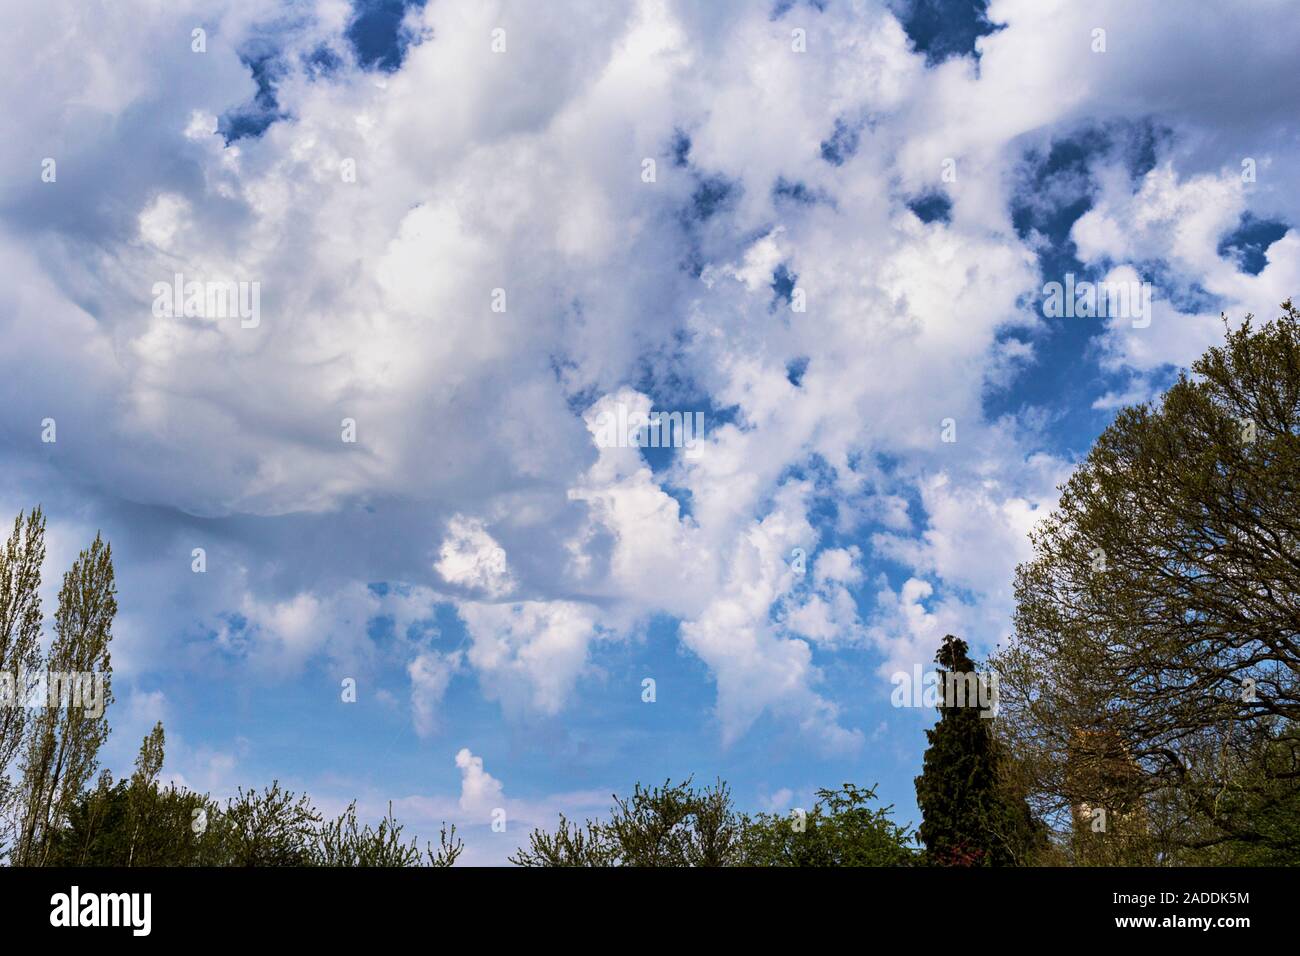 Altocumulus floccus clouds in spring. Altocumulus clouds occur at middle altitudes (2400-6000 metres). There are several types of altocumulus clouds. Stock Photo